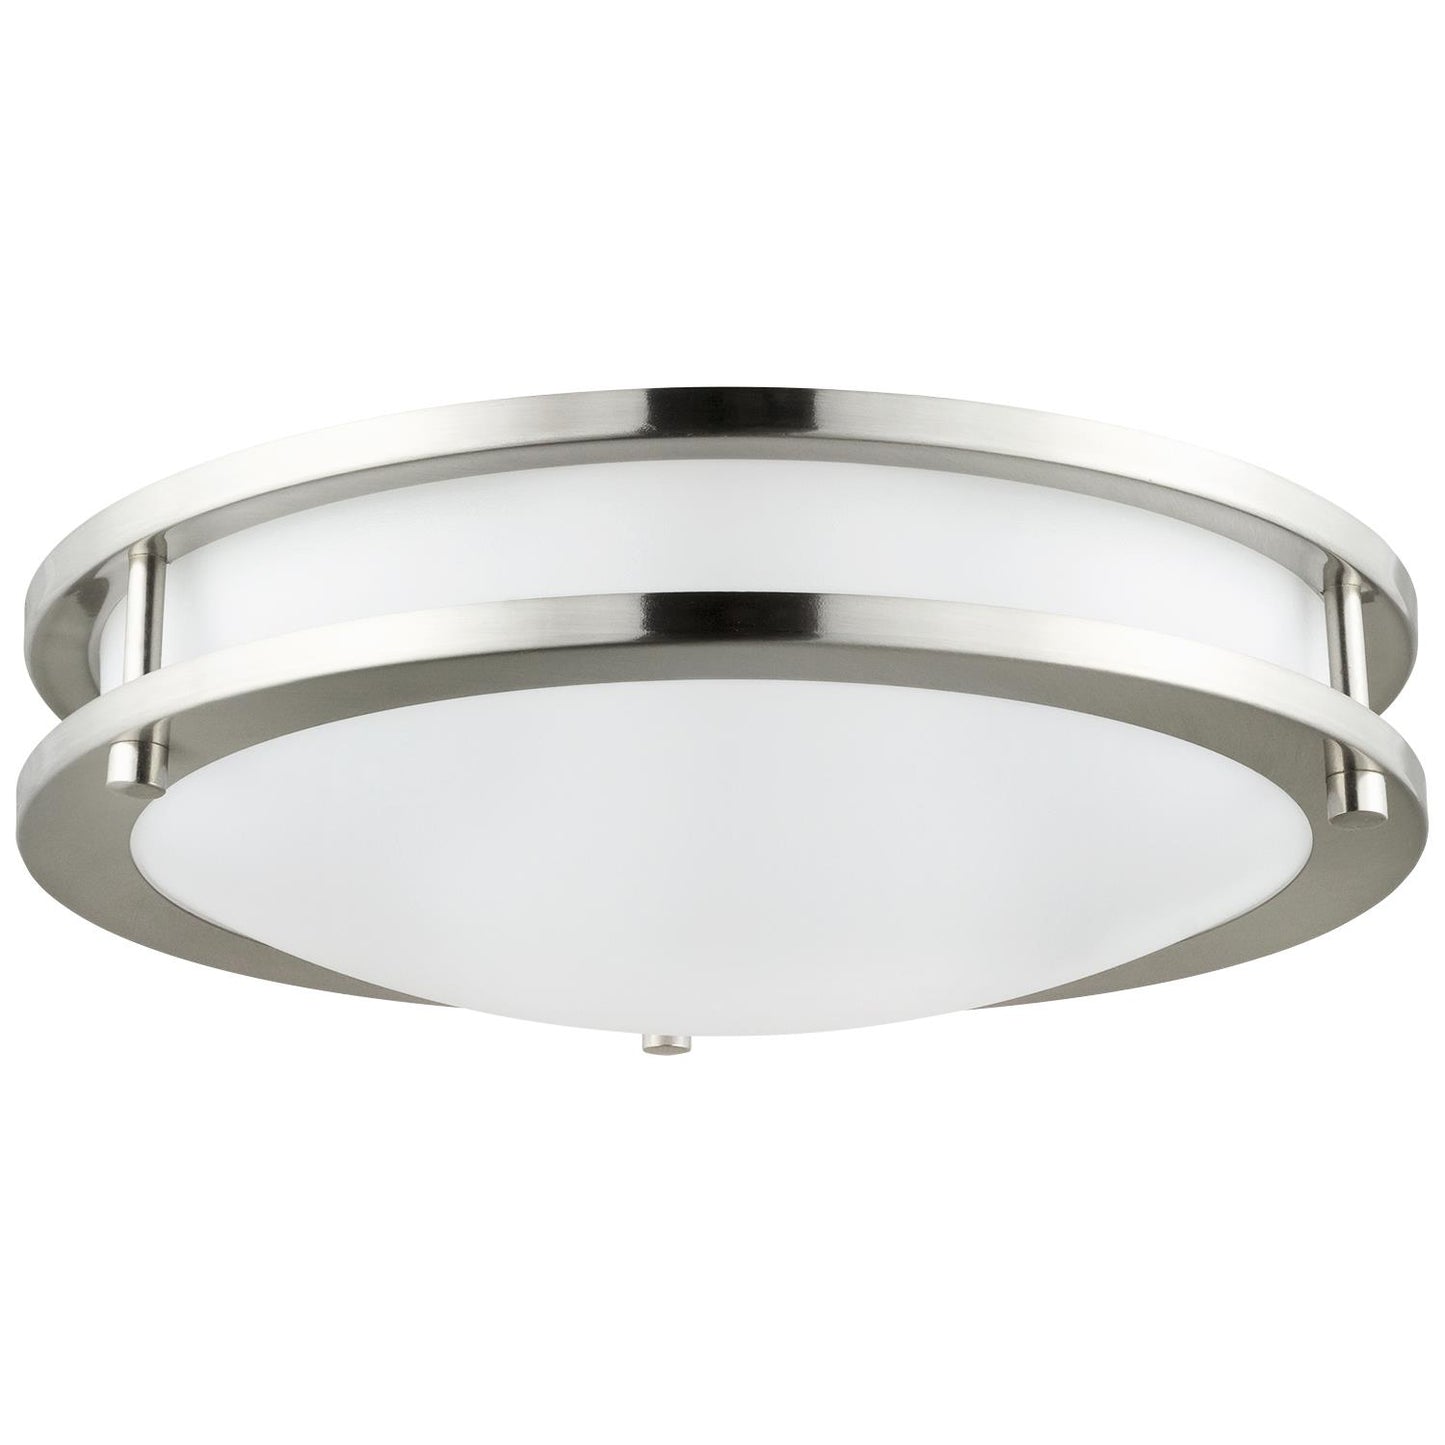 Sunlite 88319-SU LED Flush Mount Double Band Ceiling Fixture, 23 Watt, Dimmable, Brushed Nickel Finish, 14-Inch 50K - Super White